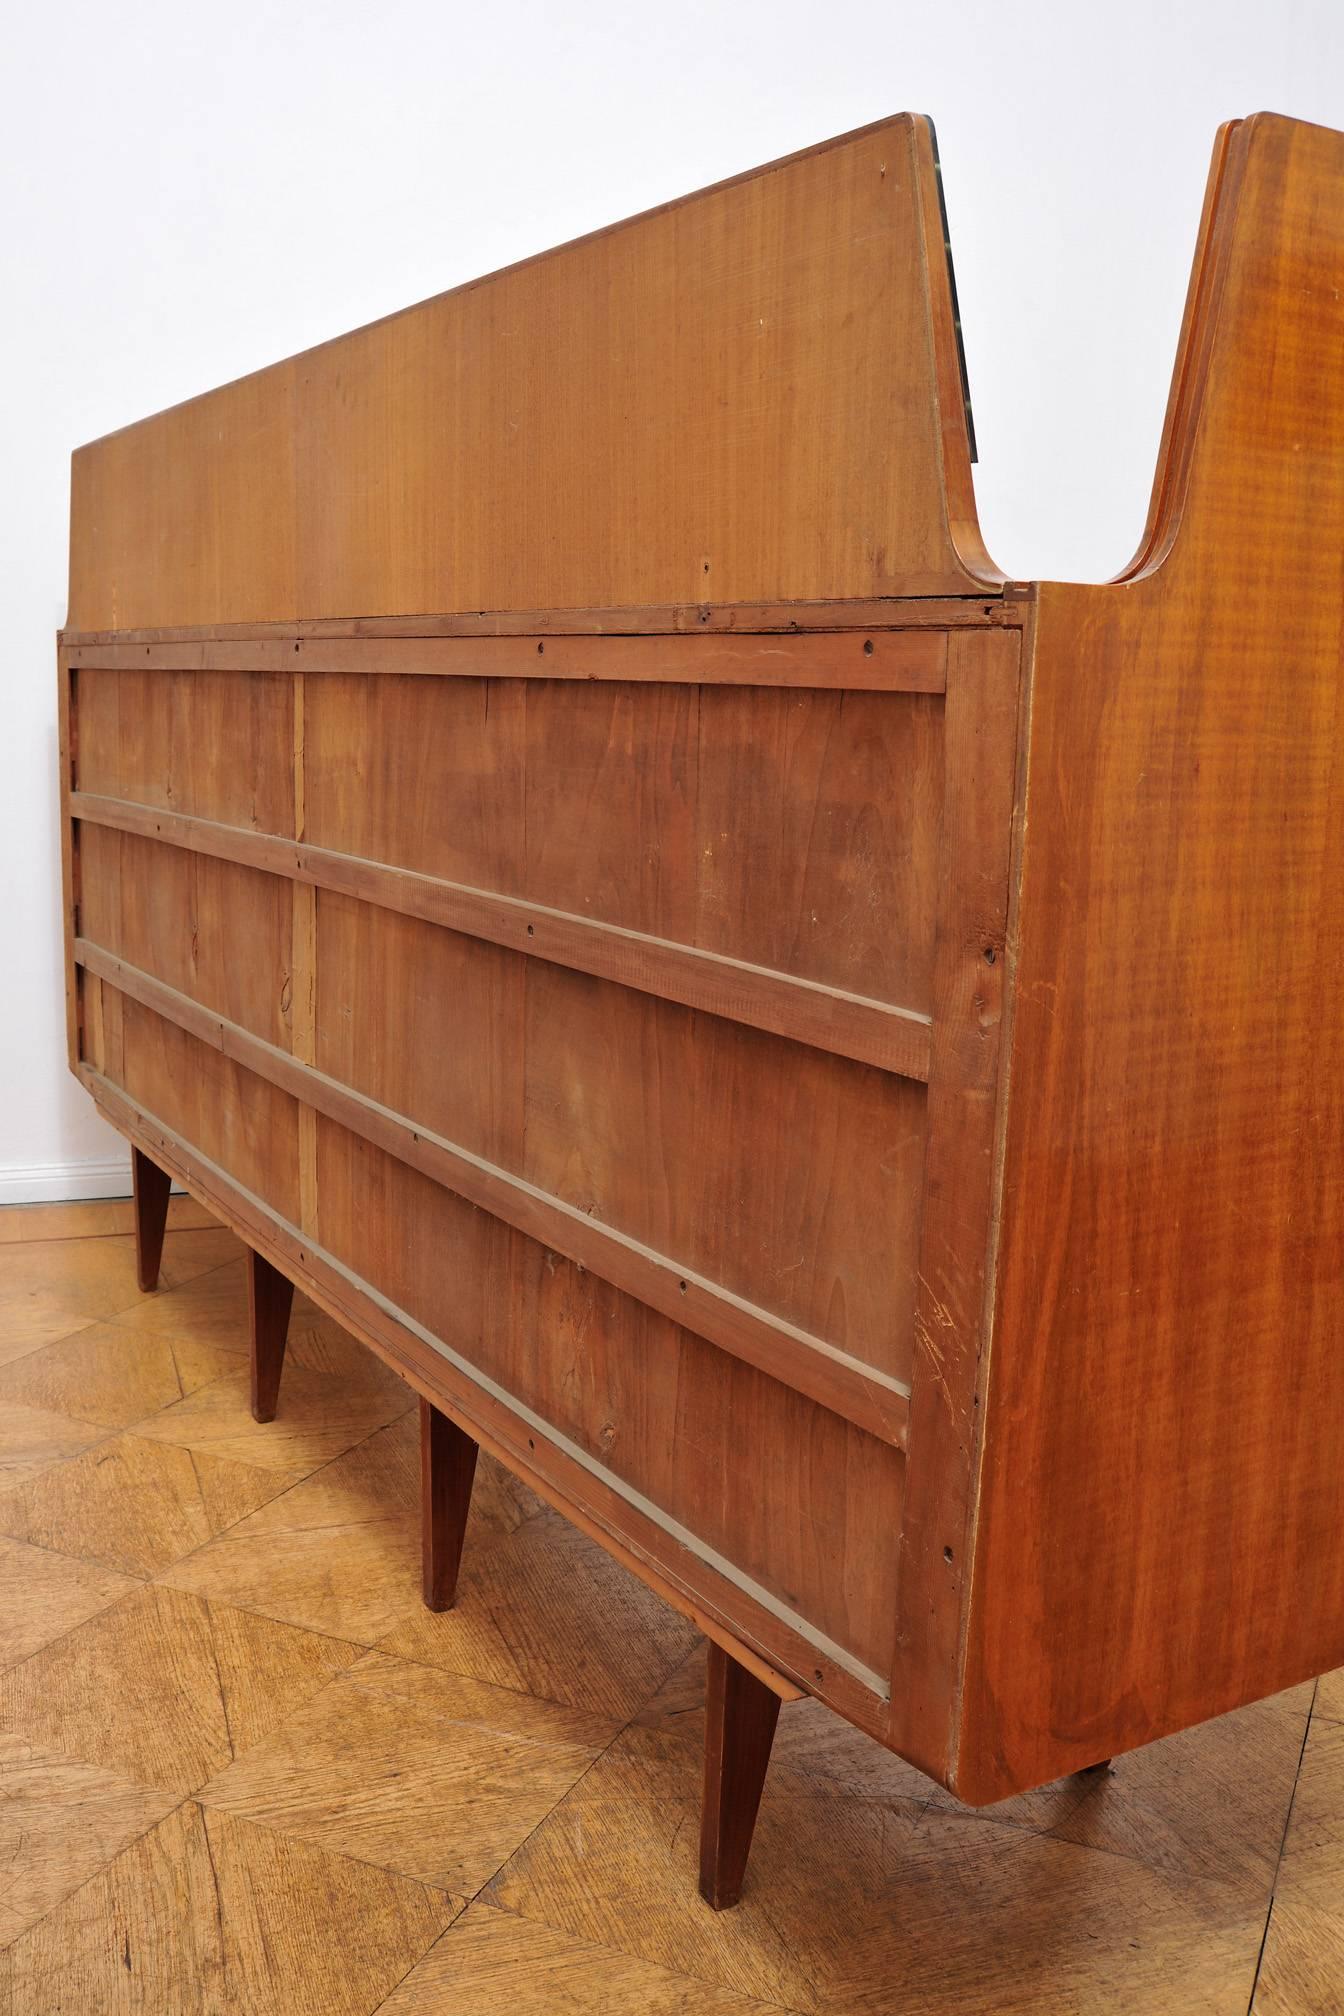 20th Century Italian Sideboard 1960s Made of Teak, Brass, Glass and Mirror For Sale 4